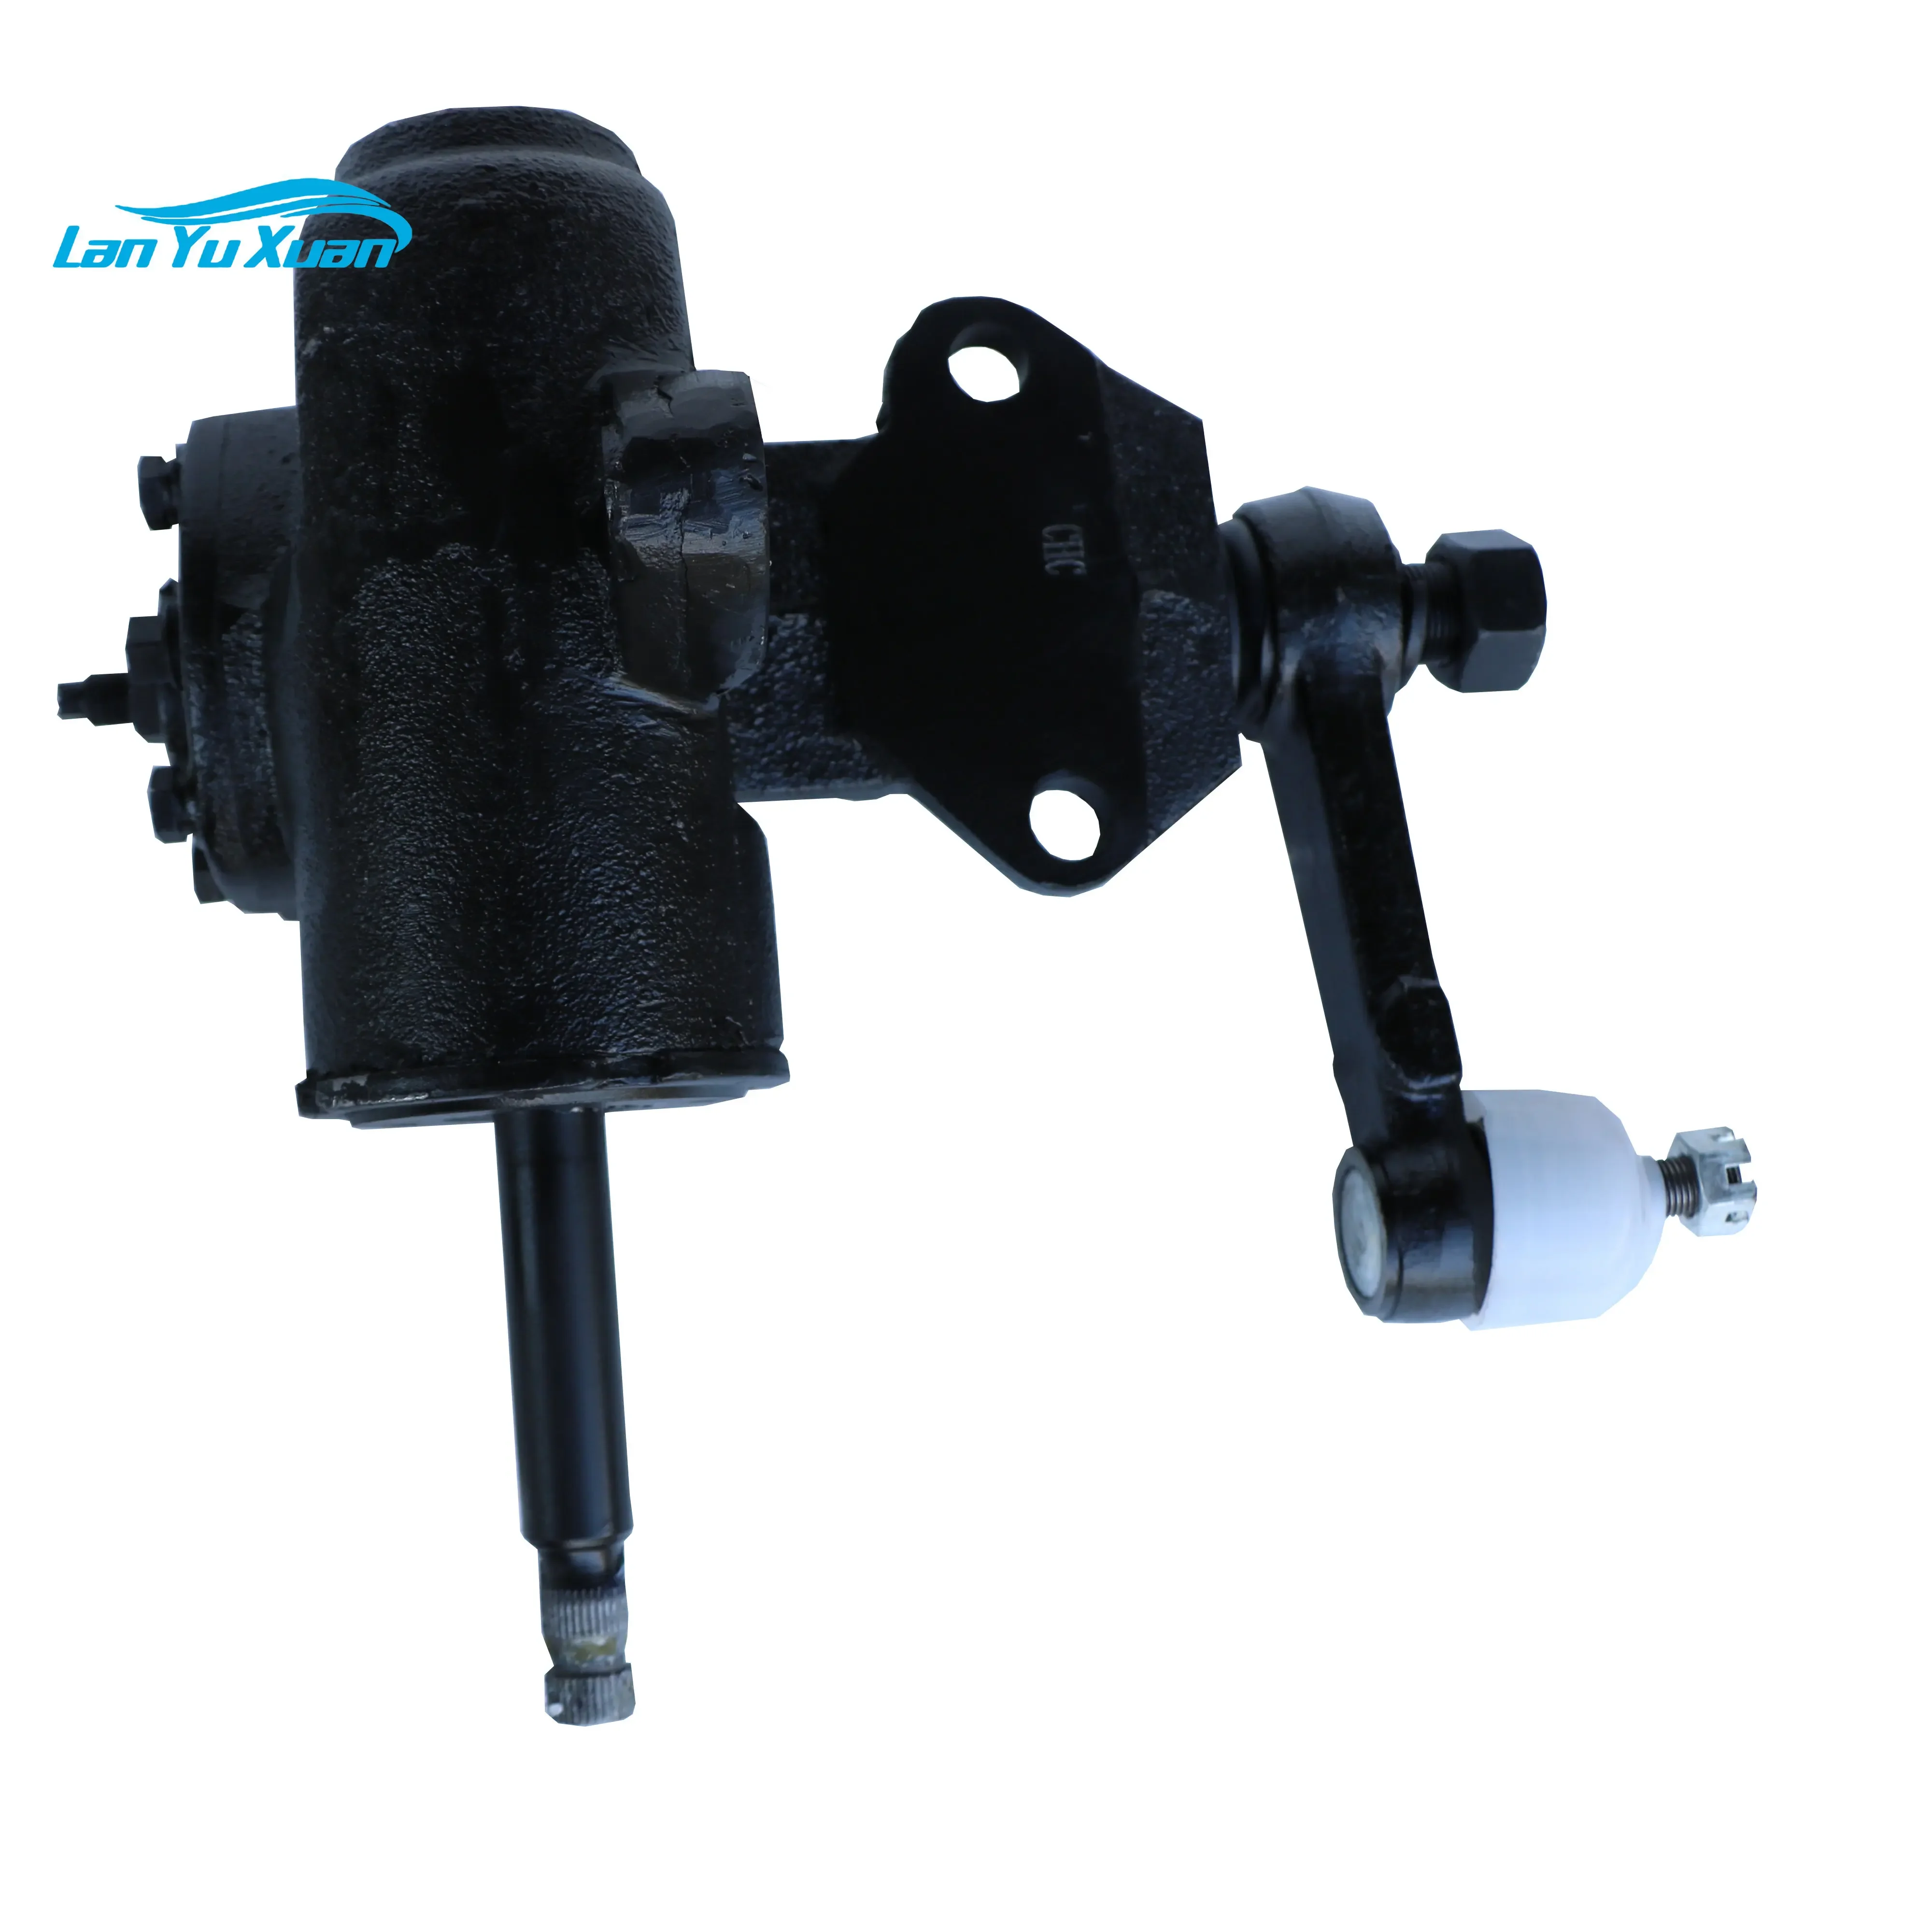 

china factory produce steering gear box assy compatible with Mazda B2000 B2200 B2600 OEM UB3932110